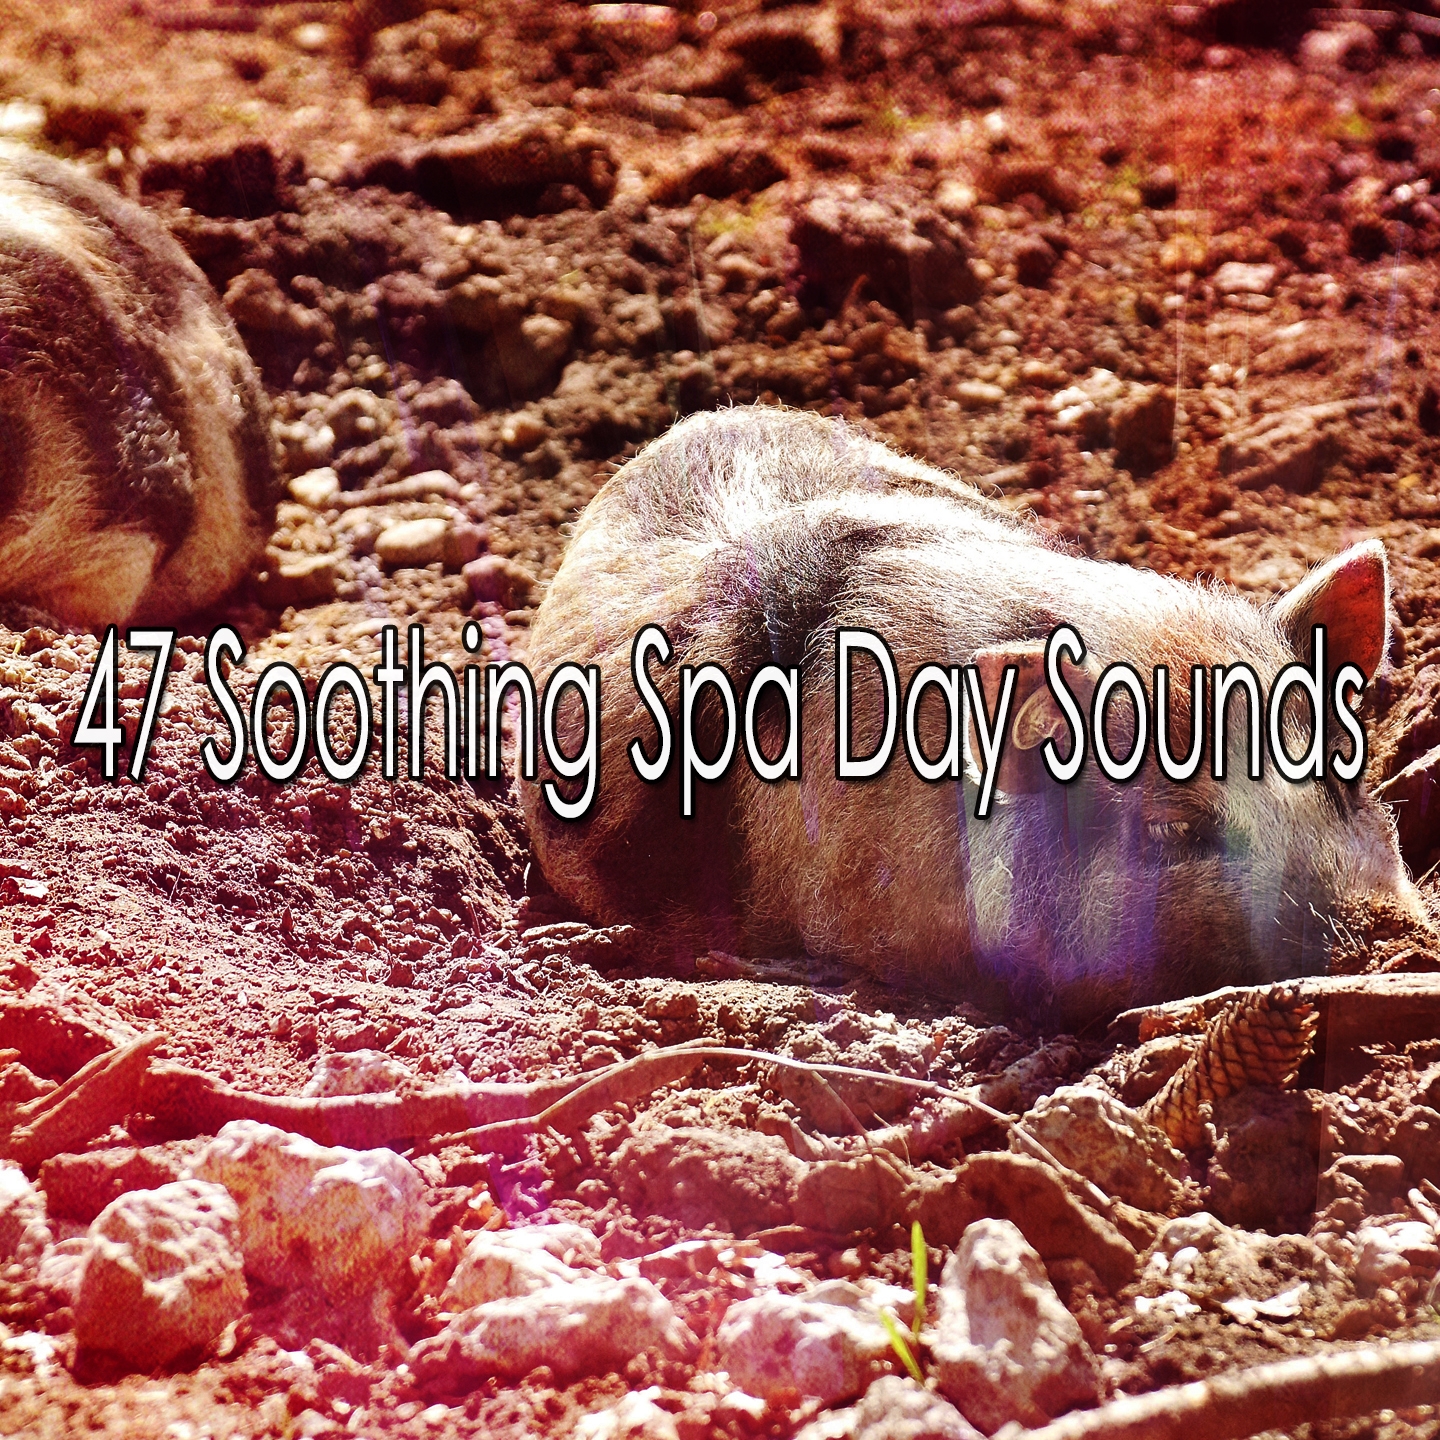 47 Soothing Spa Day Sounds